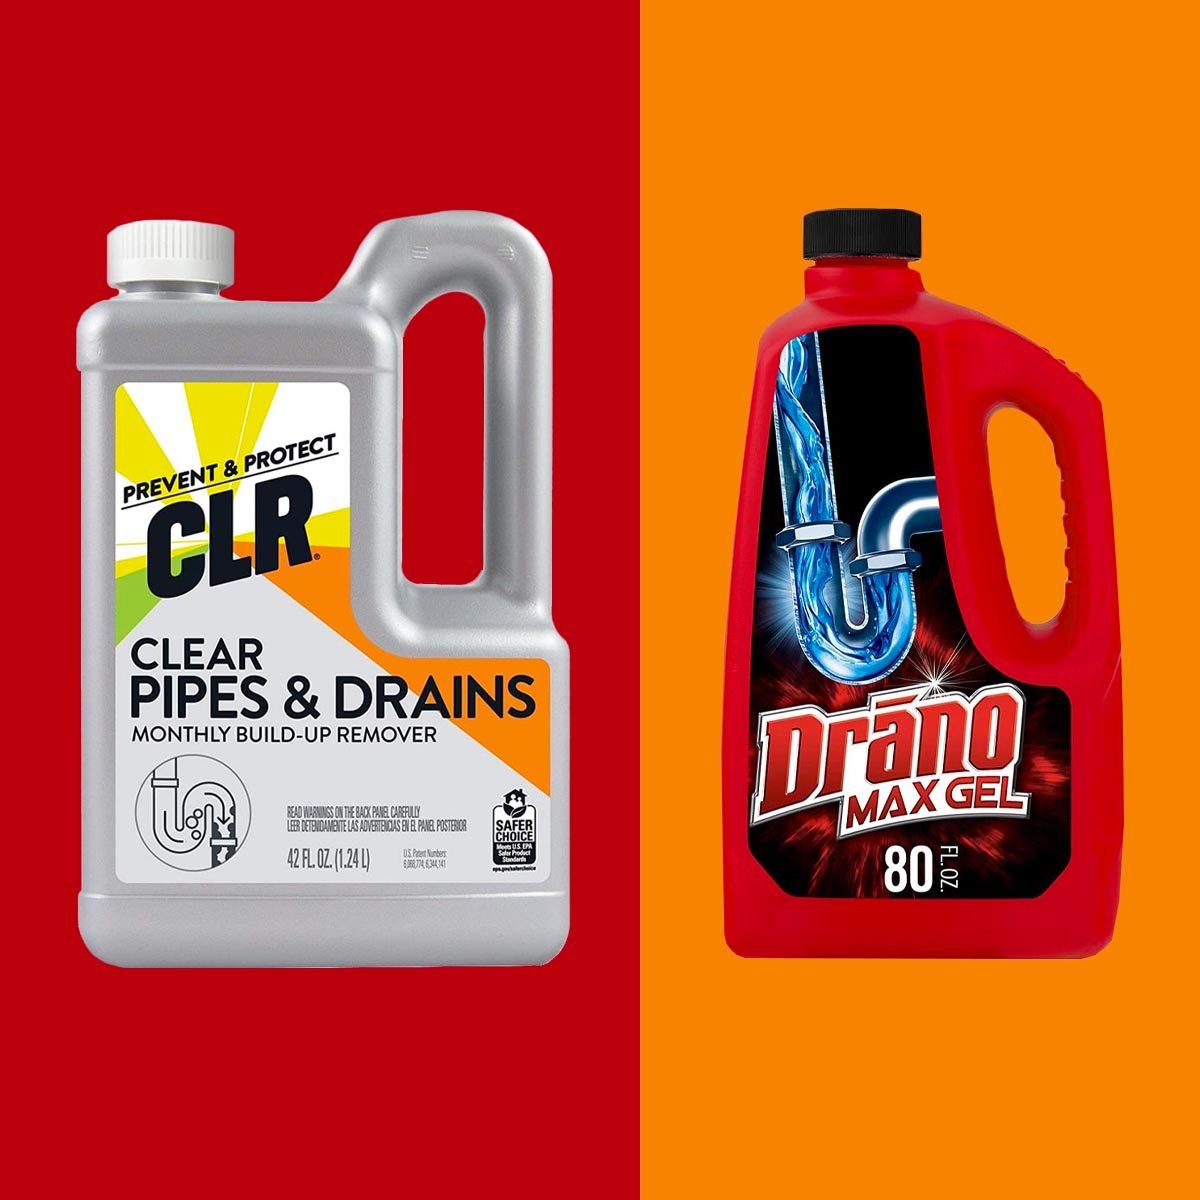 https://www.rd.com/wp-content/uploads/2021/11/11-Best-Drain-Cleaners-to-Quickly-Unclog-Your-Sink-ecomm-feature.jpg?fit=700%2C700